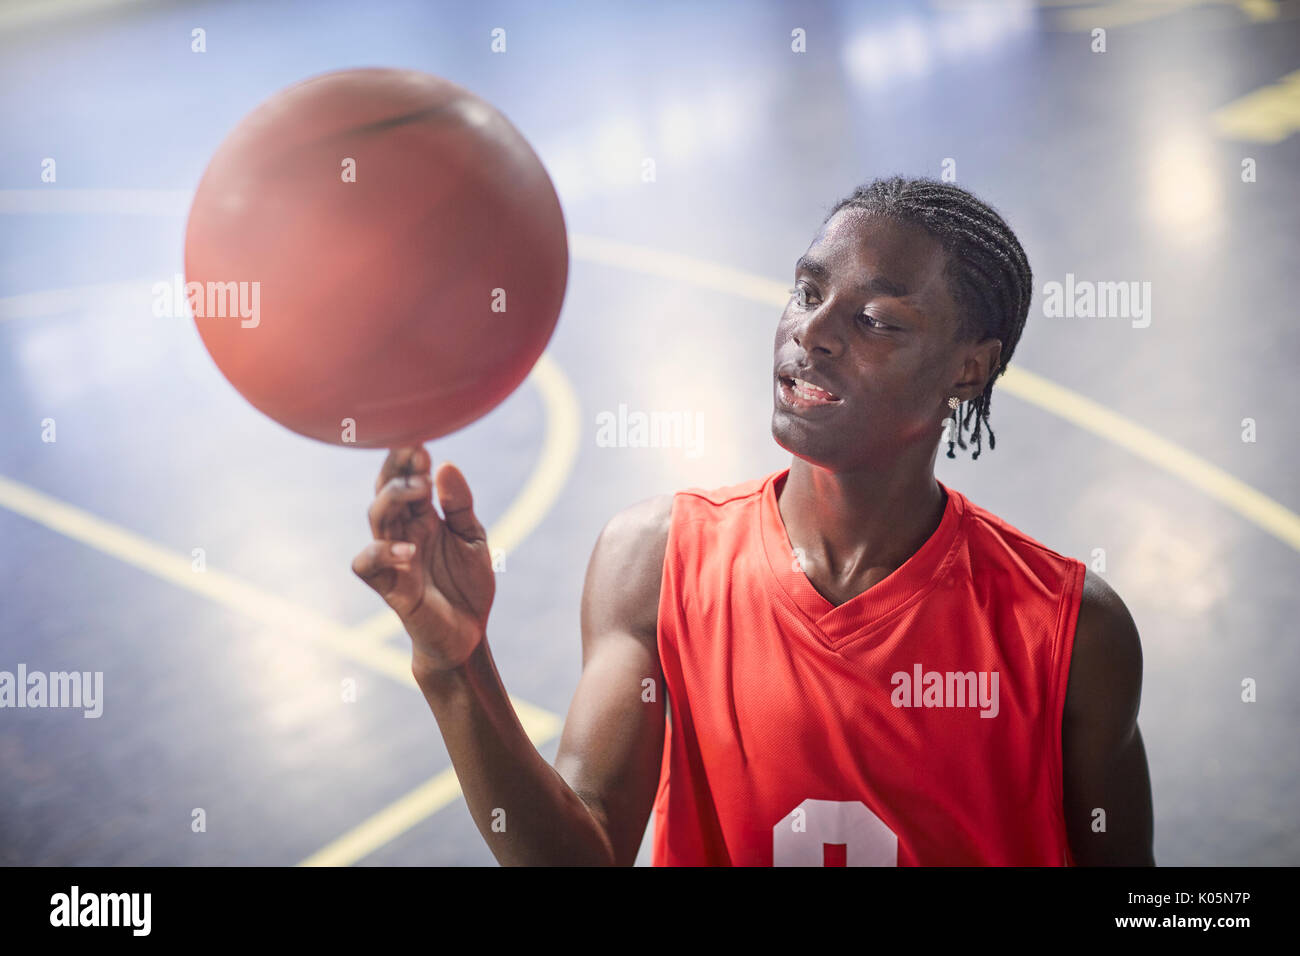 Young male basketball player spinning basketball on court Stock Photo